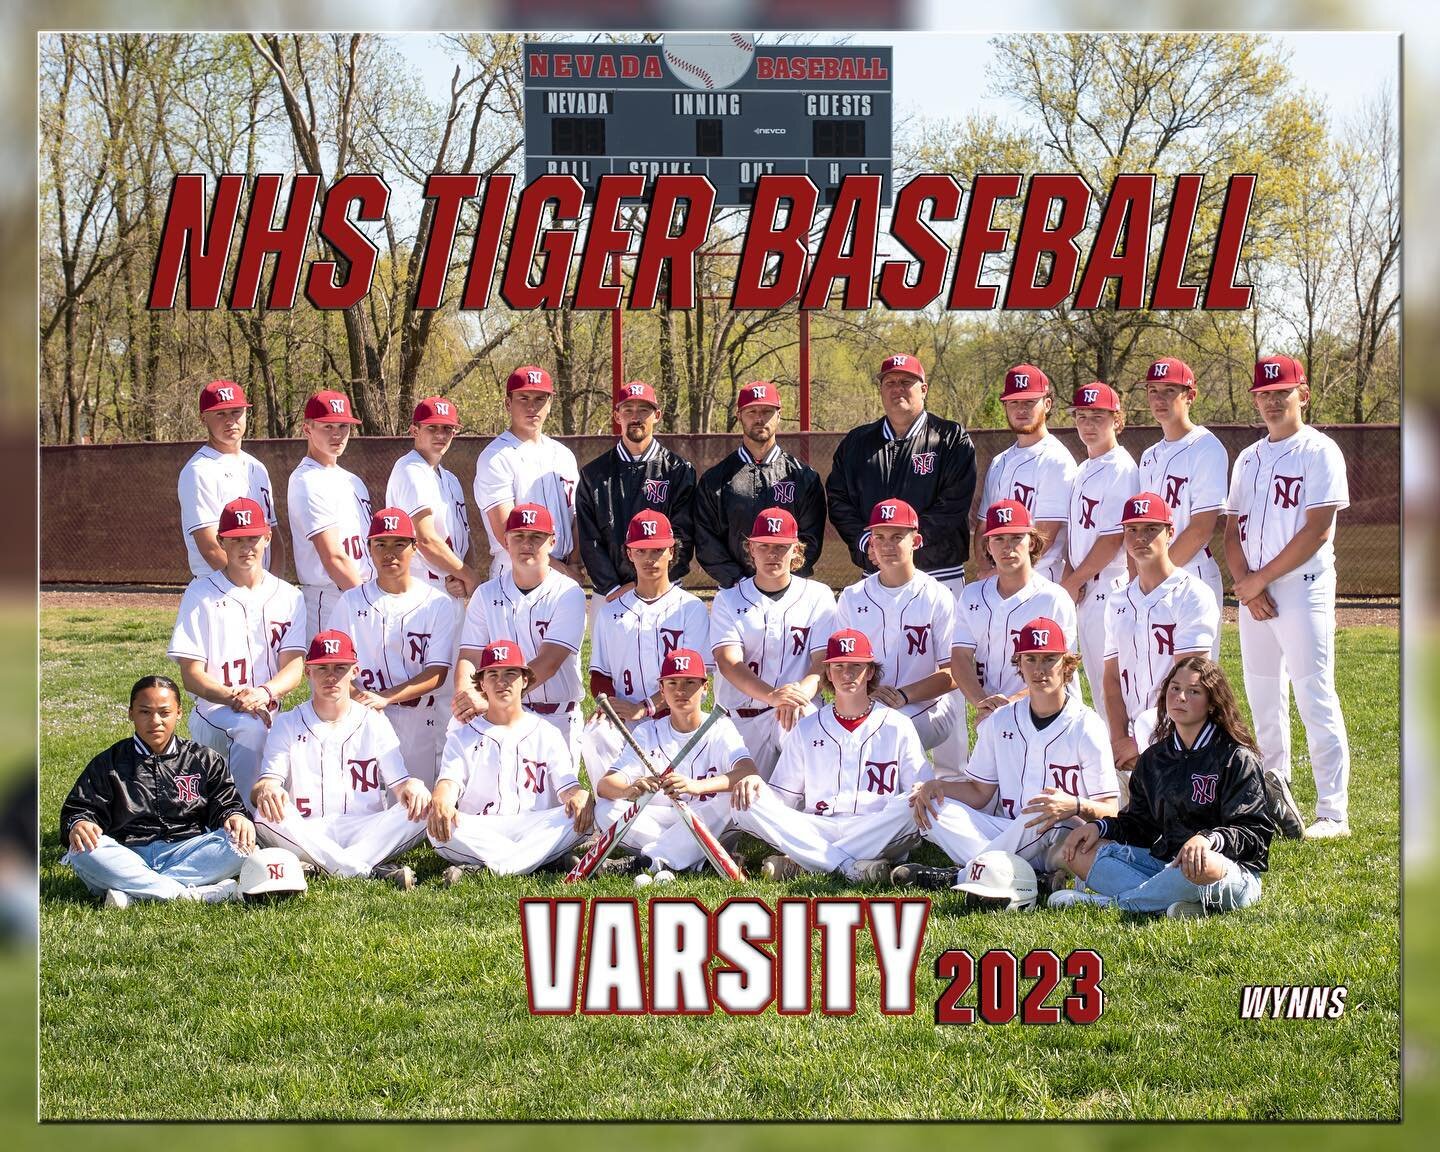 Good luck to our NHS Tiger Baseball team today in the Class 4 District 12 championship game against the Pleasant Hill Roosters! Go Tigers! ⚾️⚾️⚾️